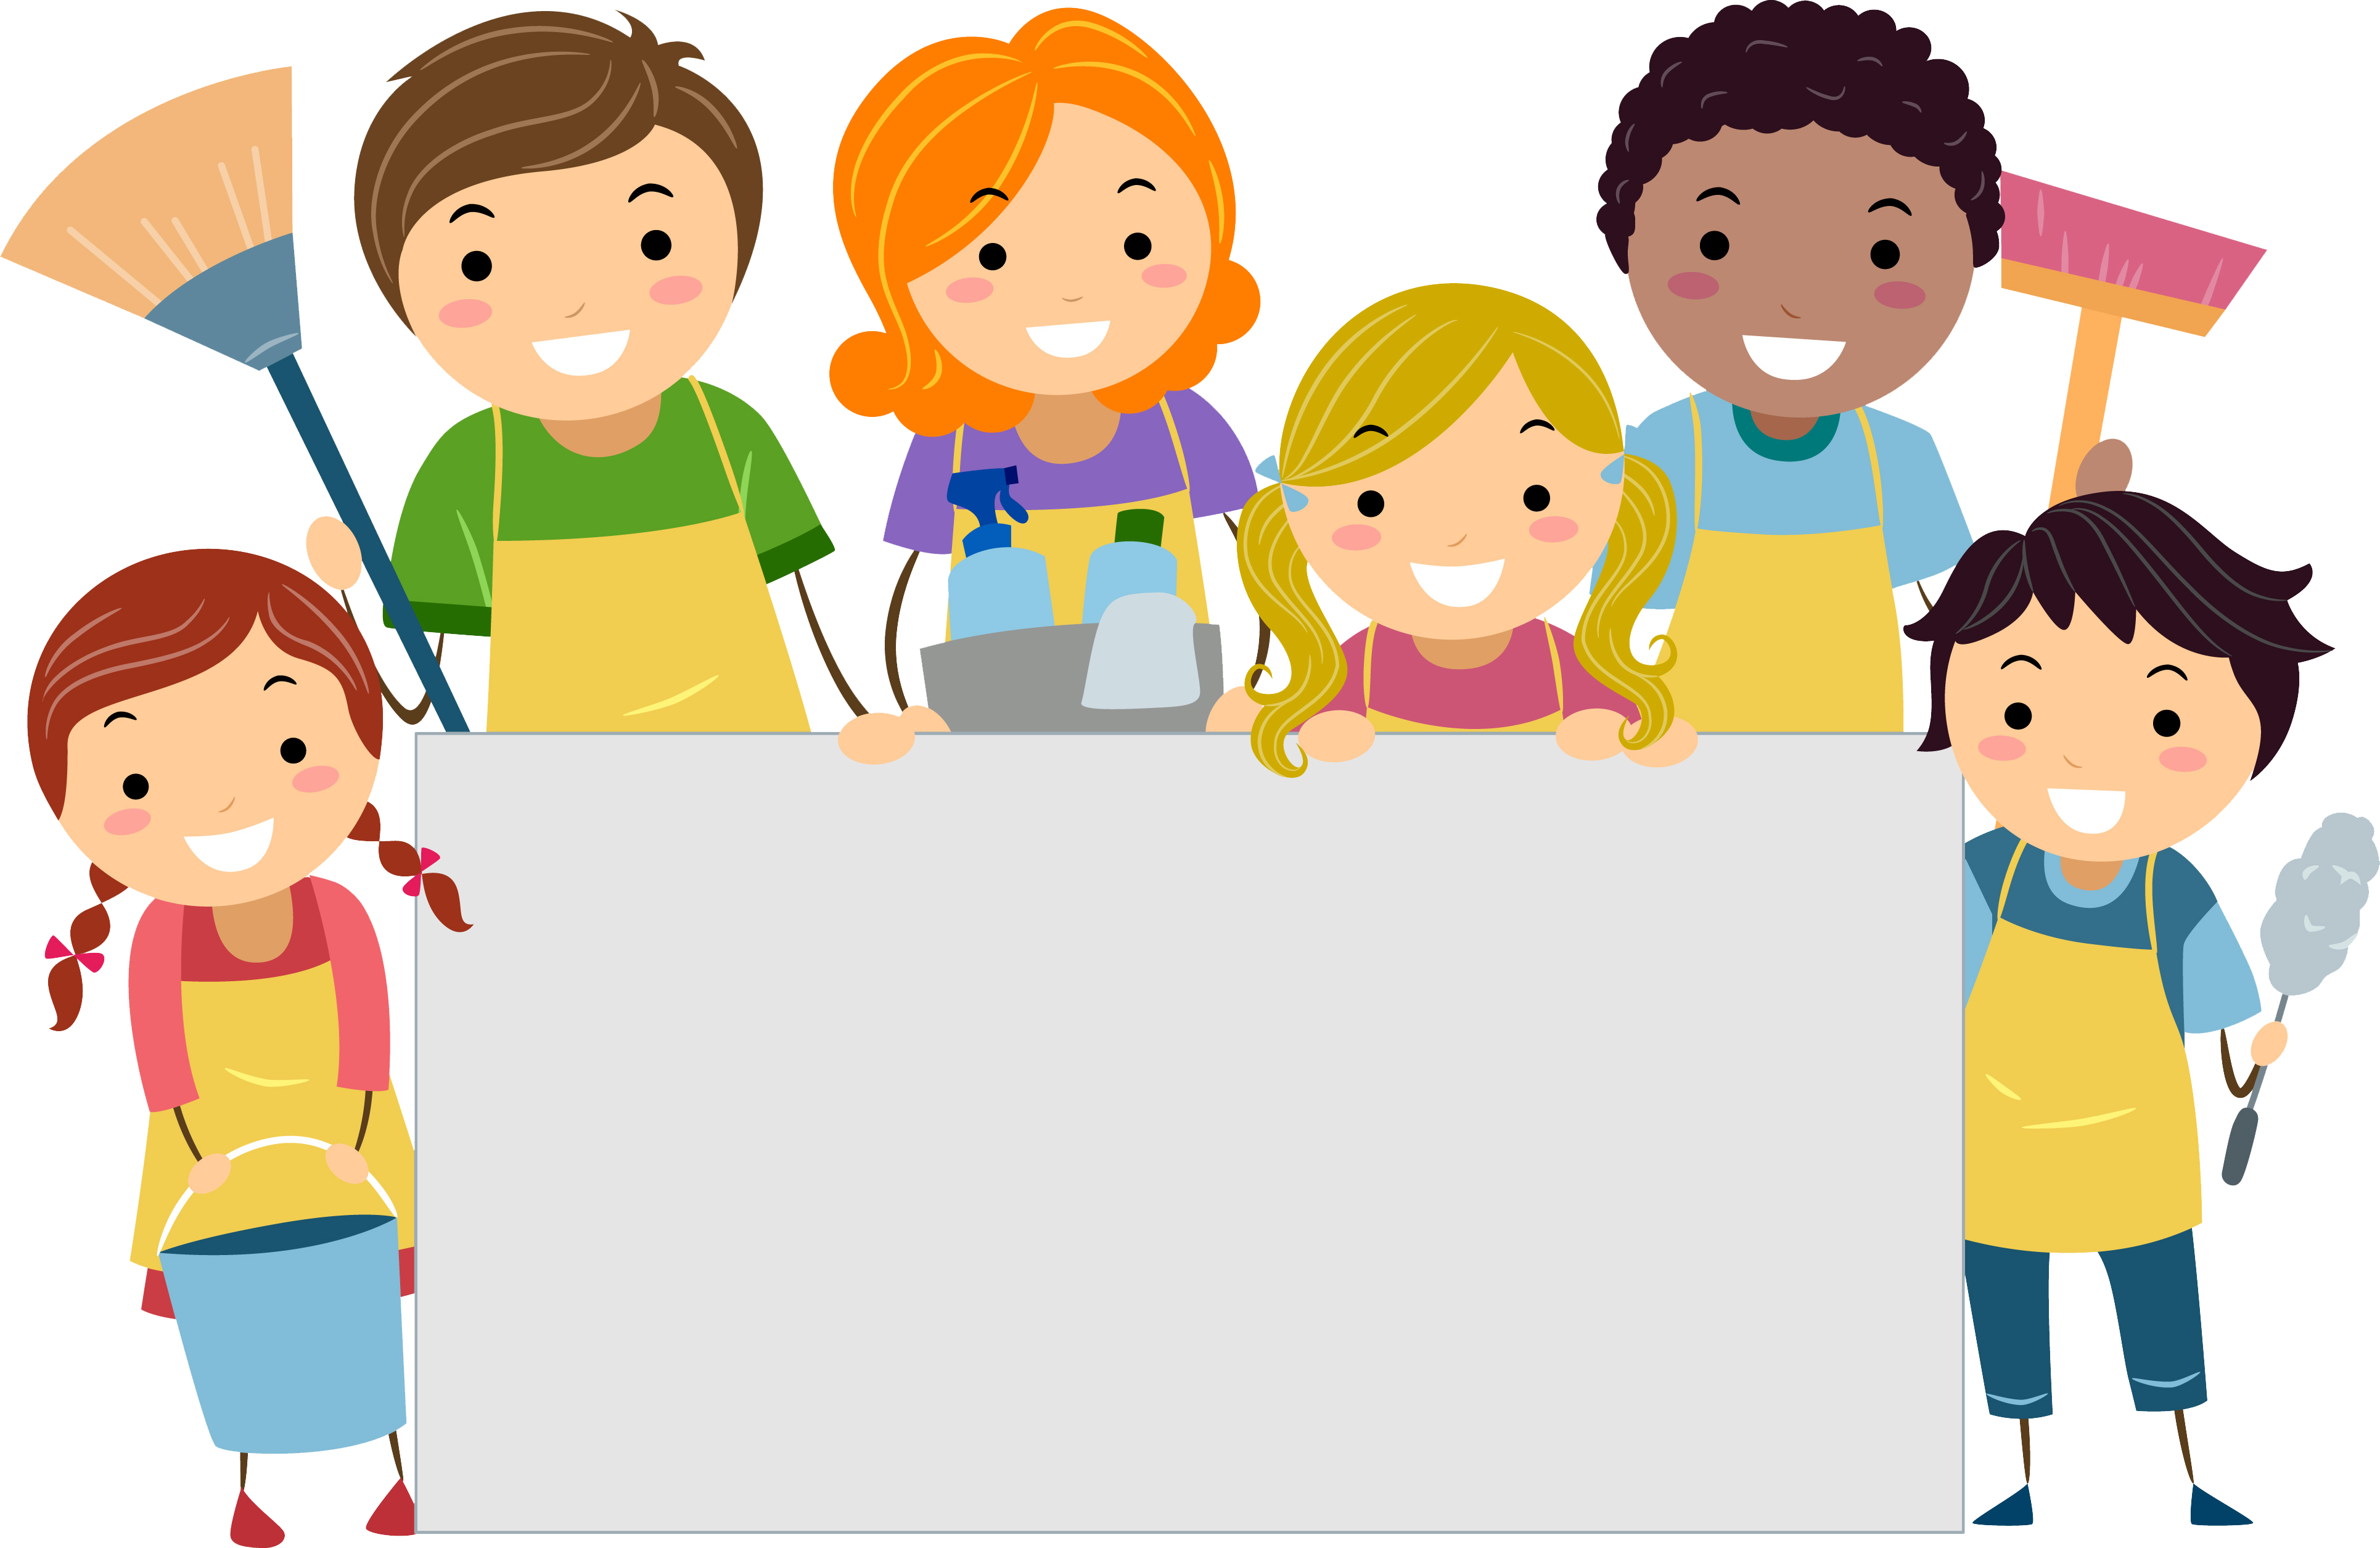 Cleaning School Child Clip Art - Cleaning School Child Clip Art (3860x2510)